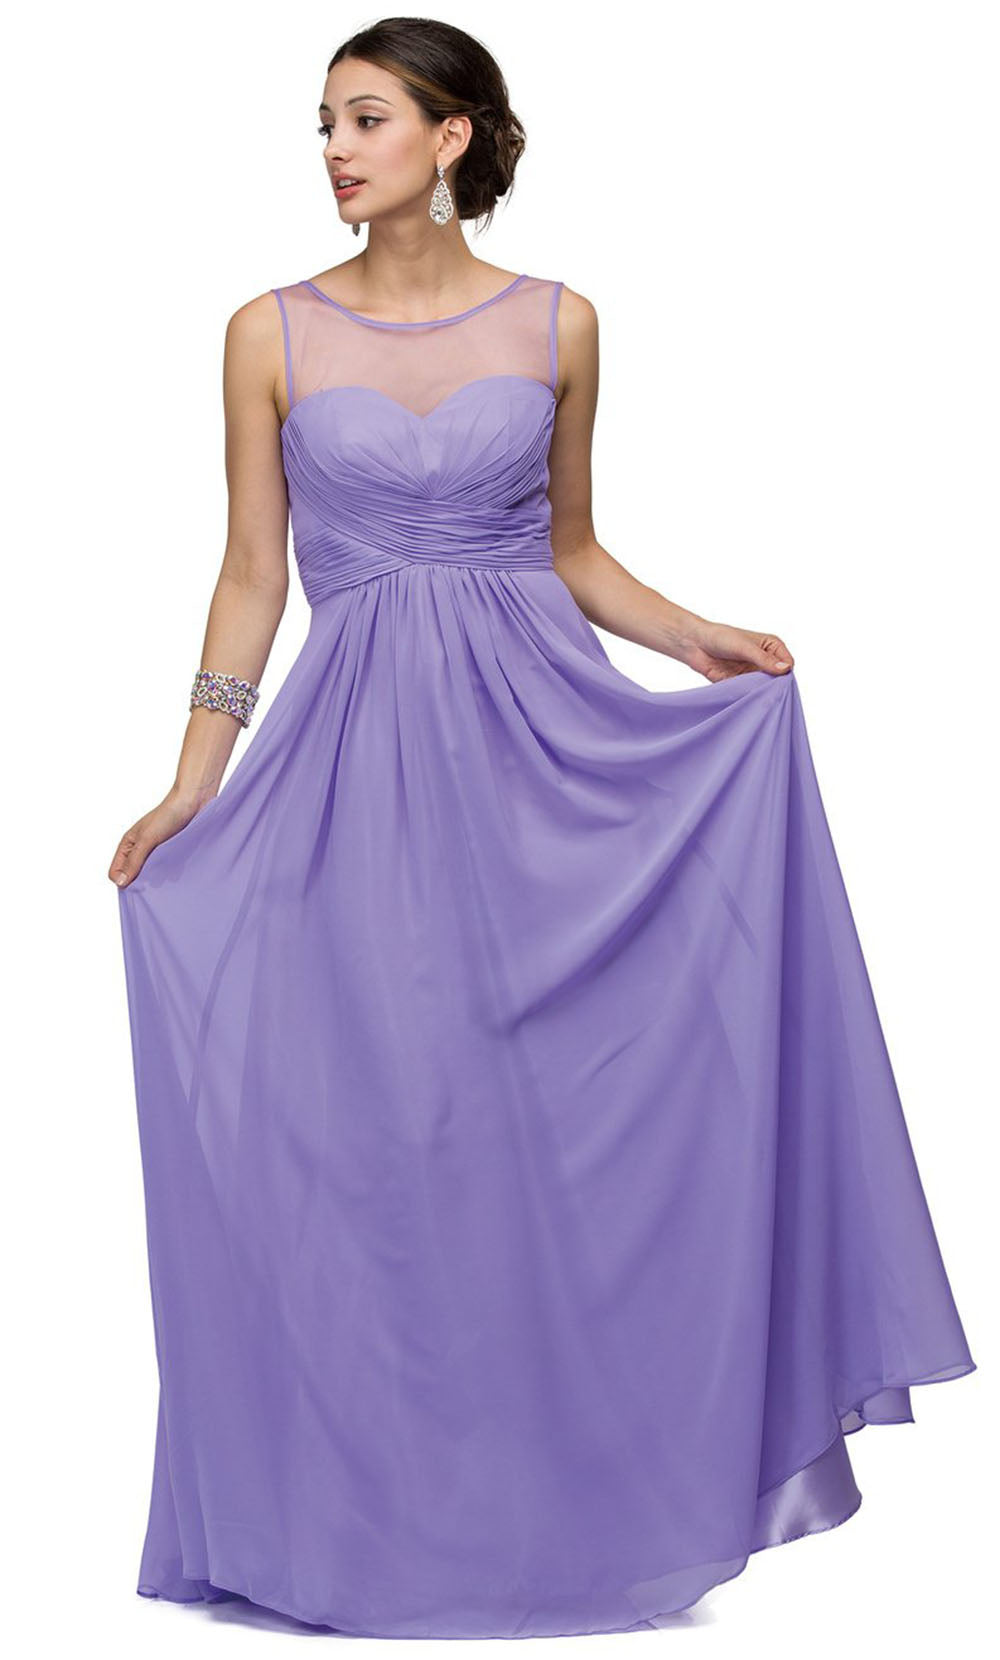 Dancing Queen - 9202 Illusion Neckline Ruched Bodice A-Line Gown In Purple